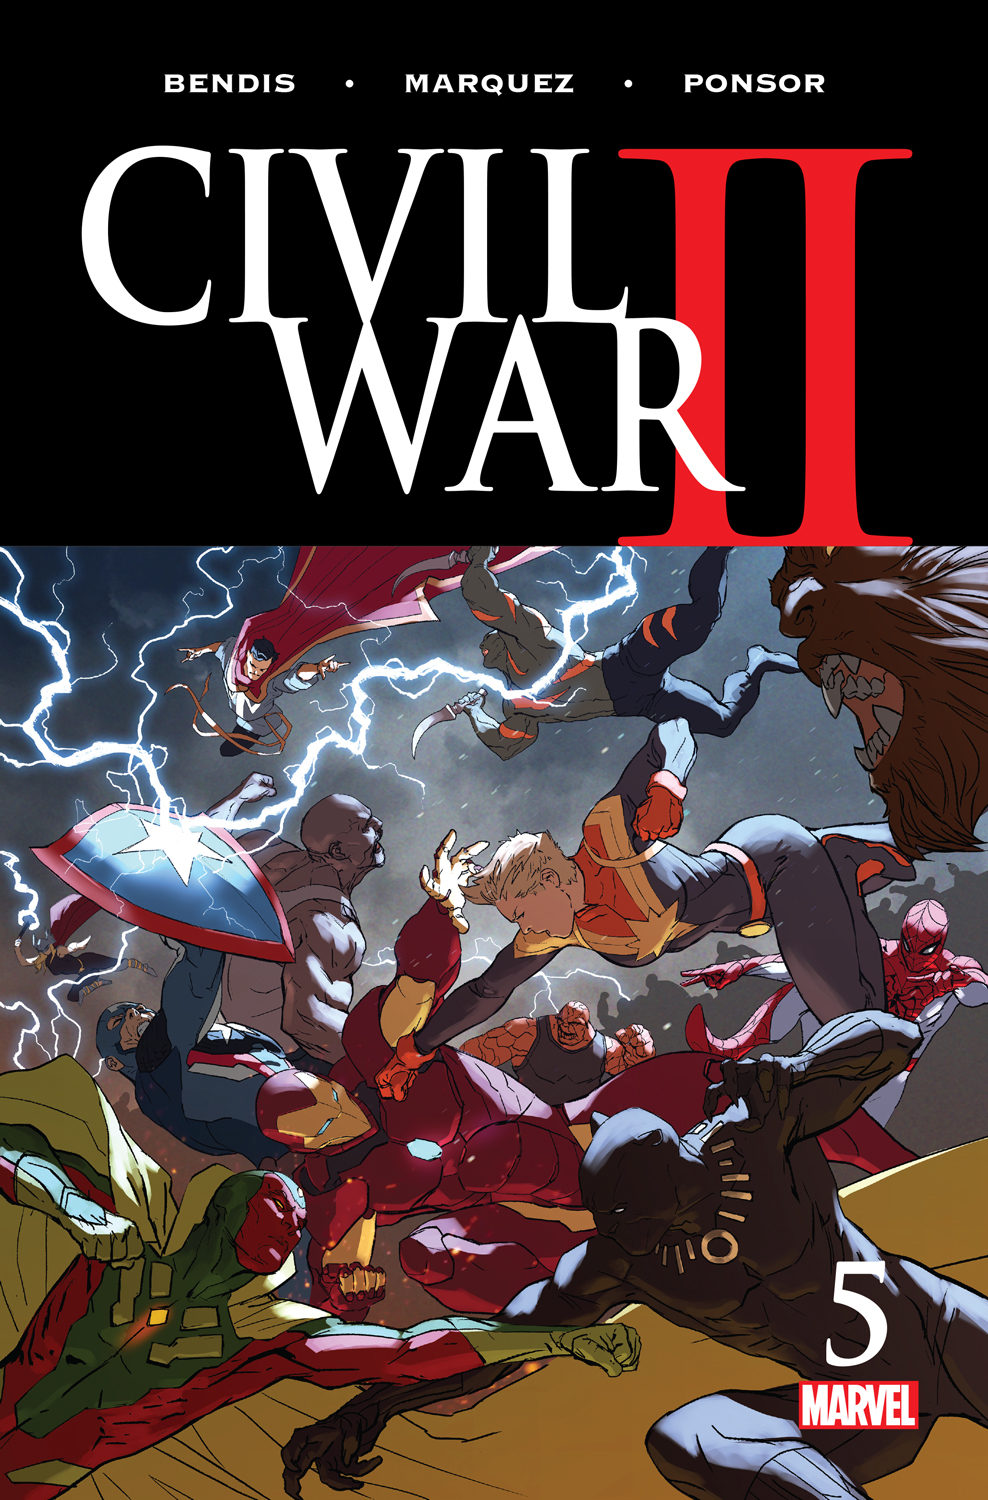 CIVIL WAR II #5 Pits Iron Man vs. Captain Marvel in All Out Grudge Match!